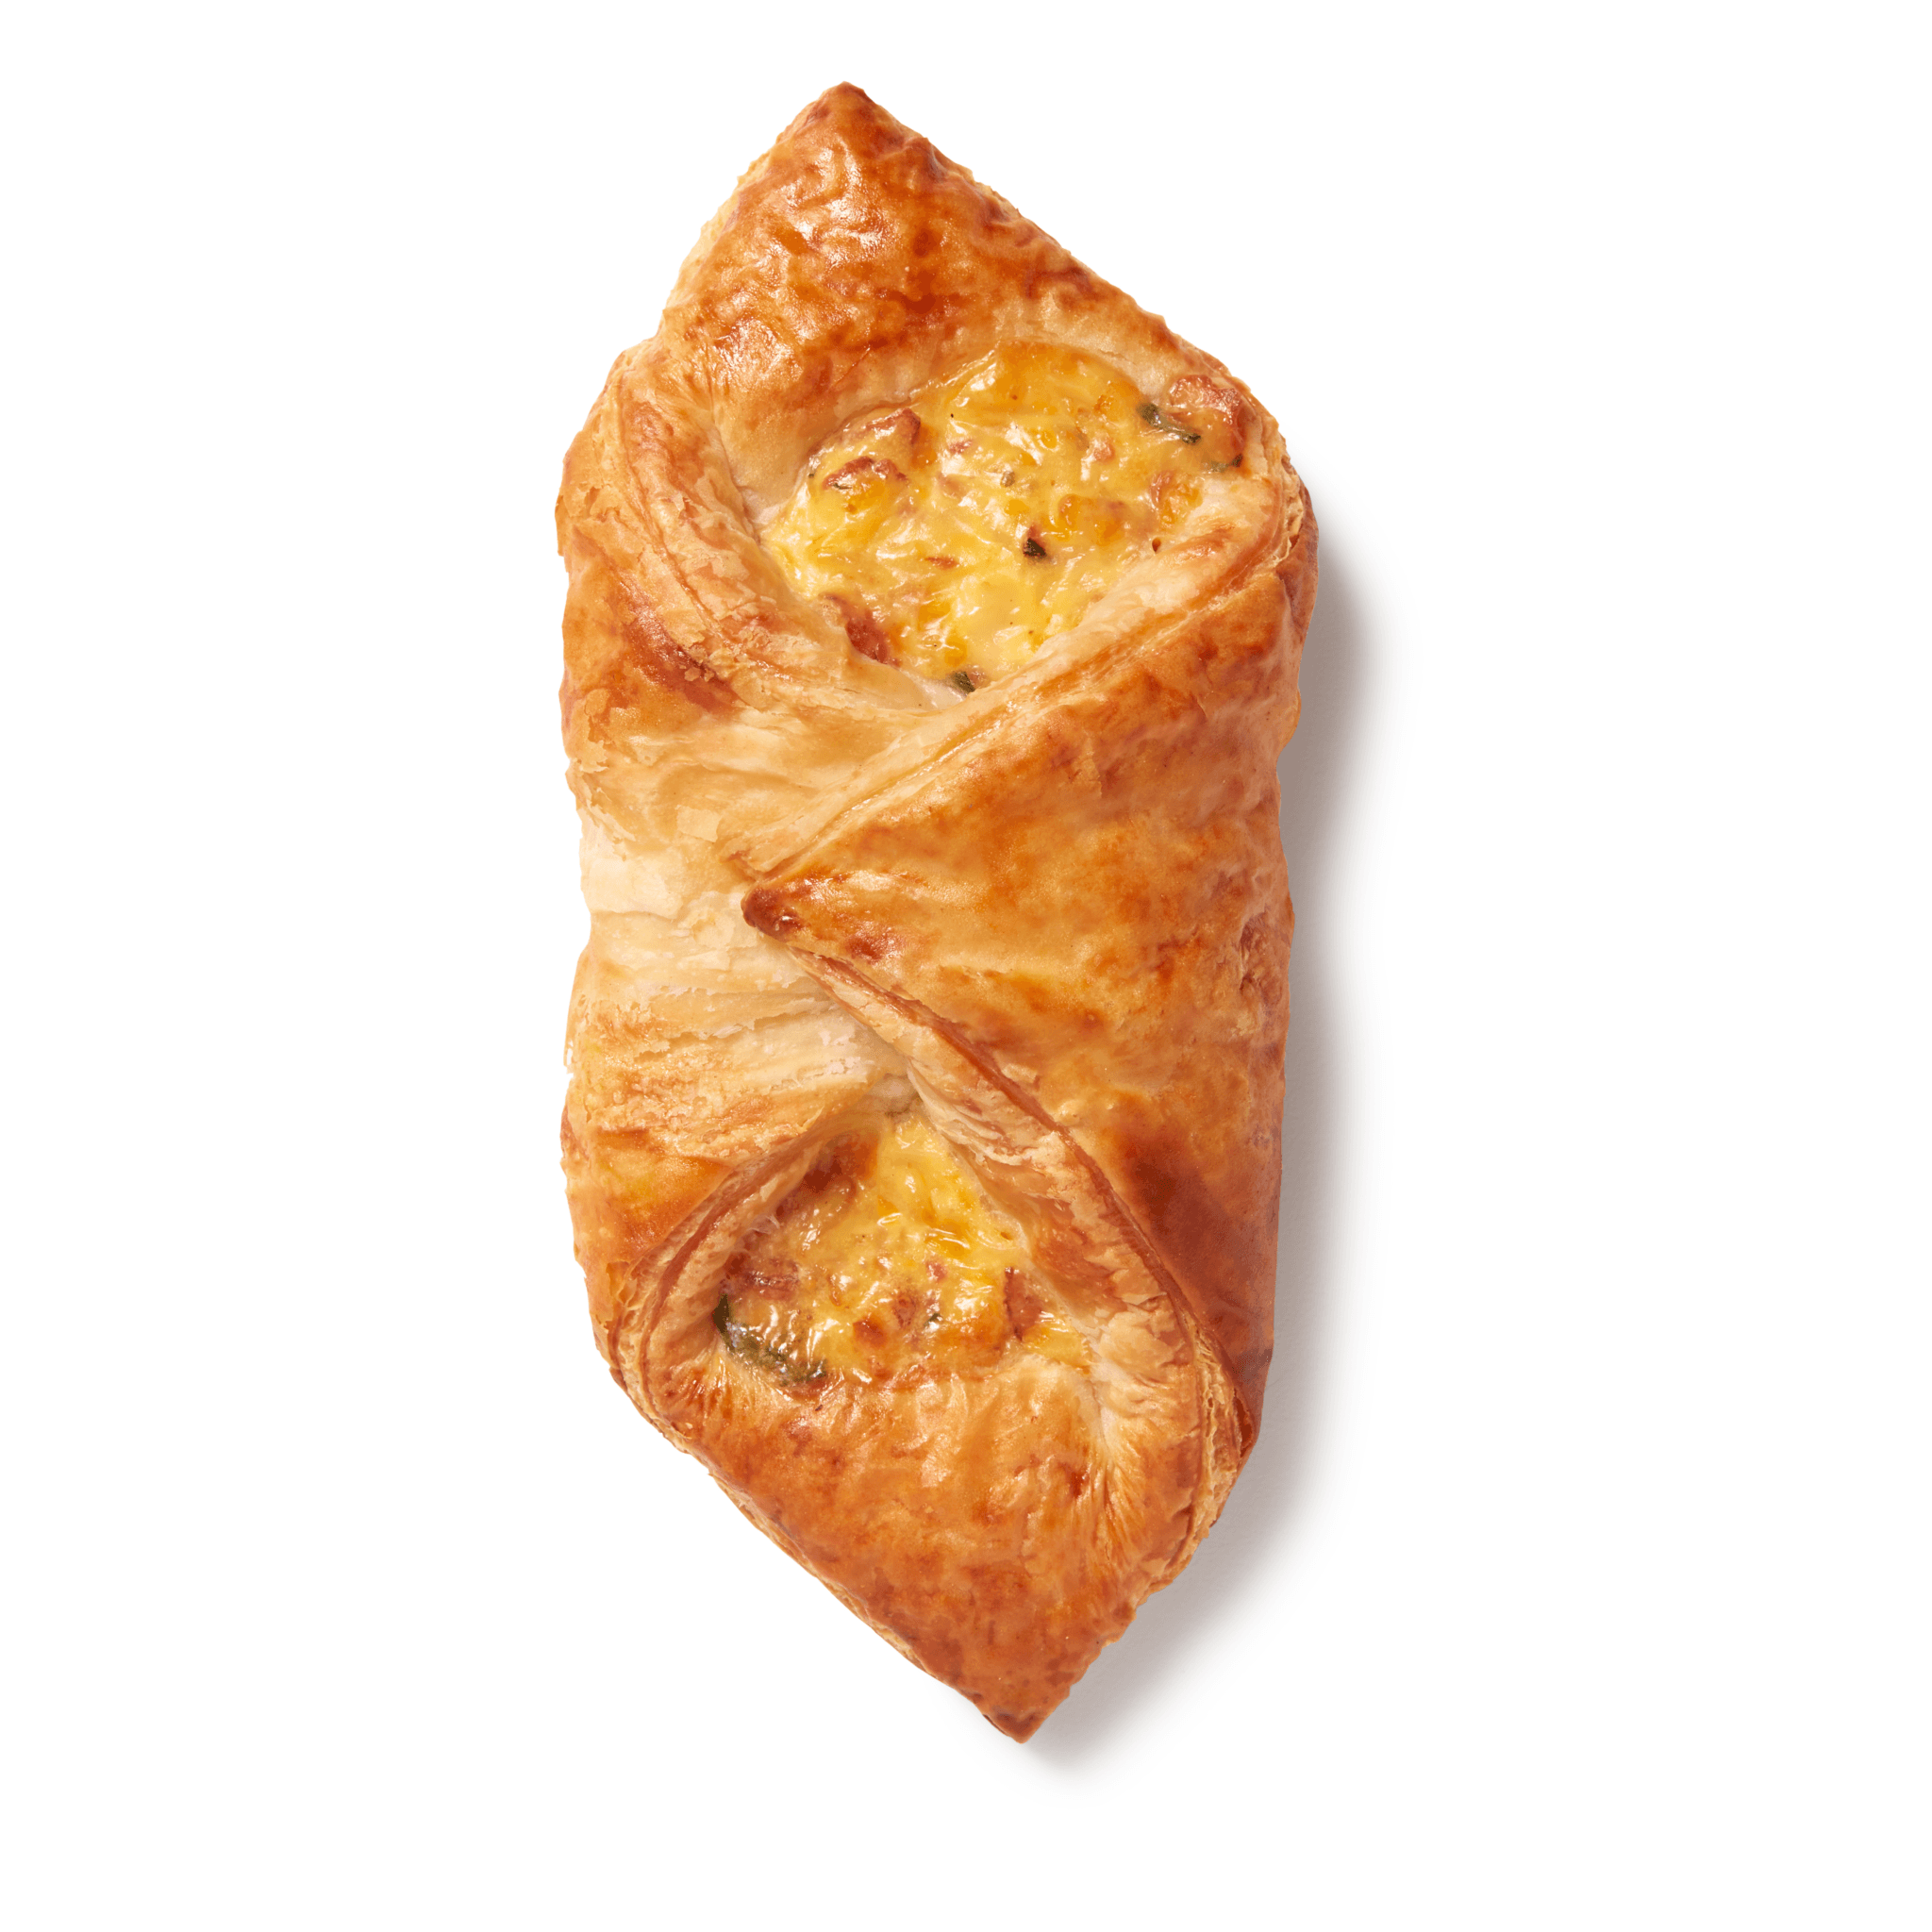 RBECL 45 bacon and egg croissant top